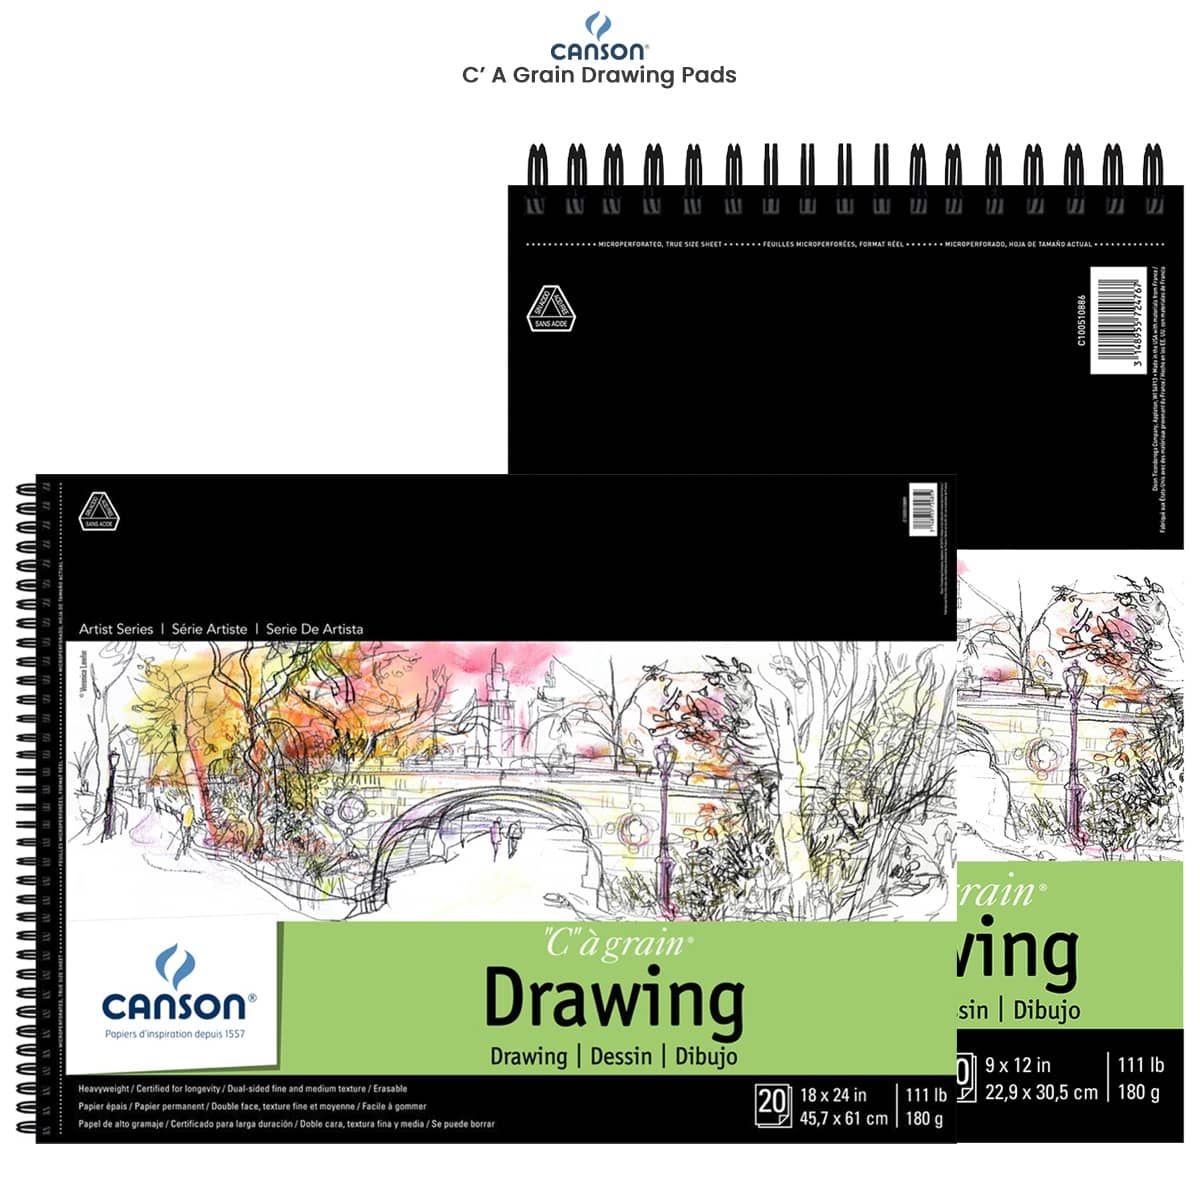 Canson C' A Grain Drawing Pads